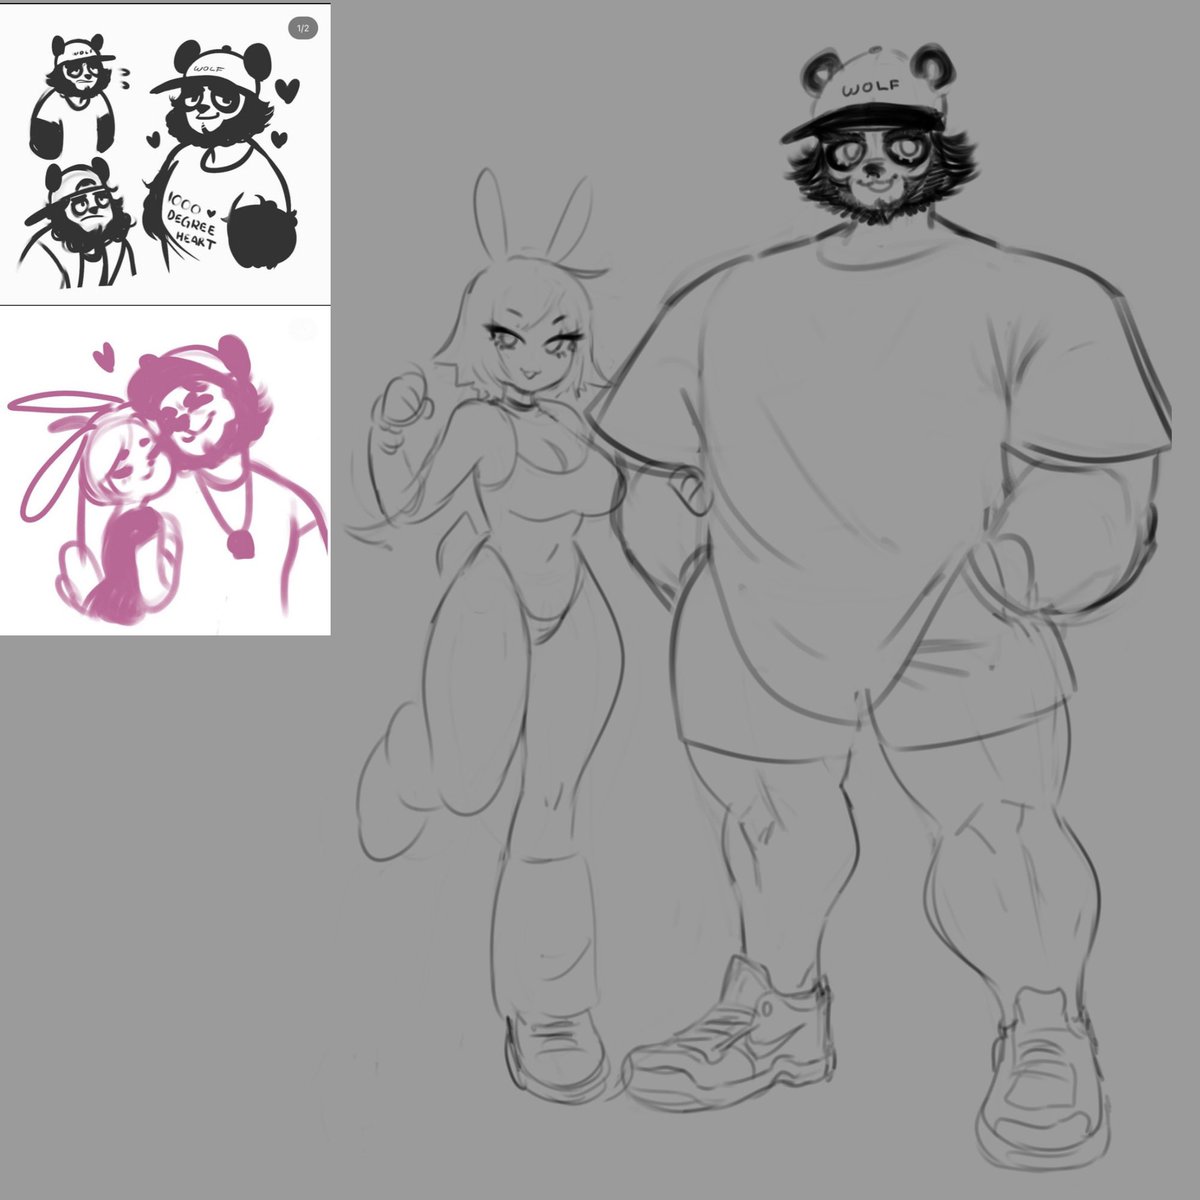 bringing back Brett. he's an mma fighter panda bear, a real softy and tebu's partner in crime 